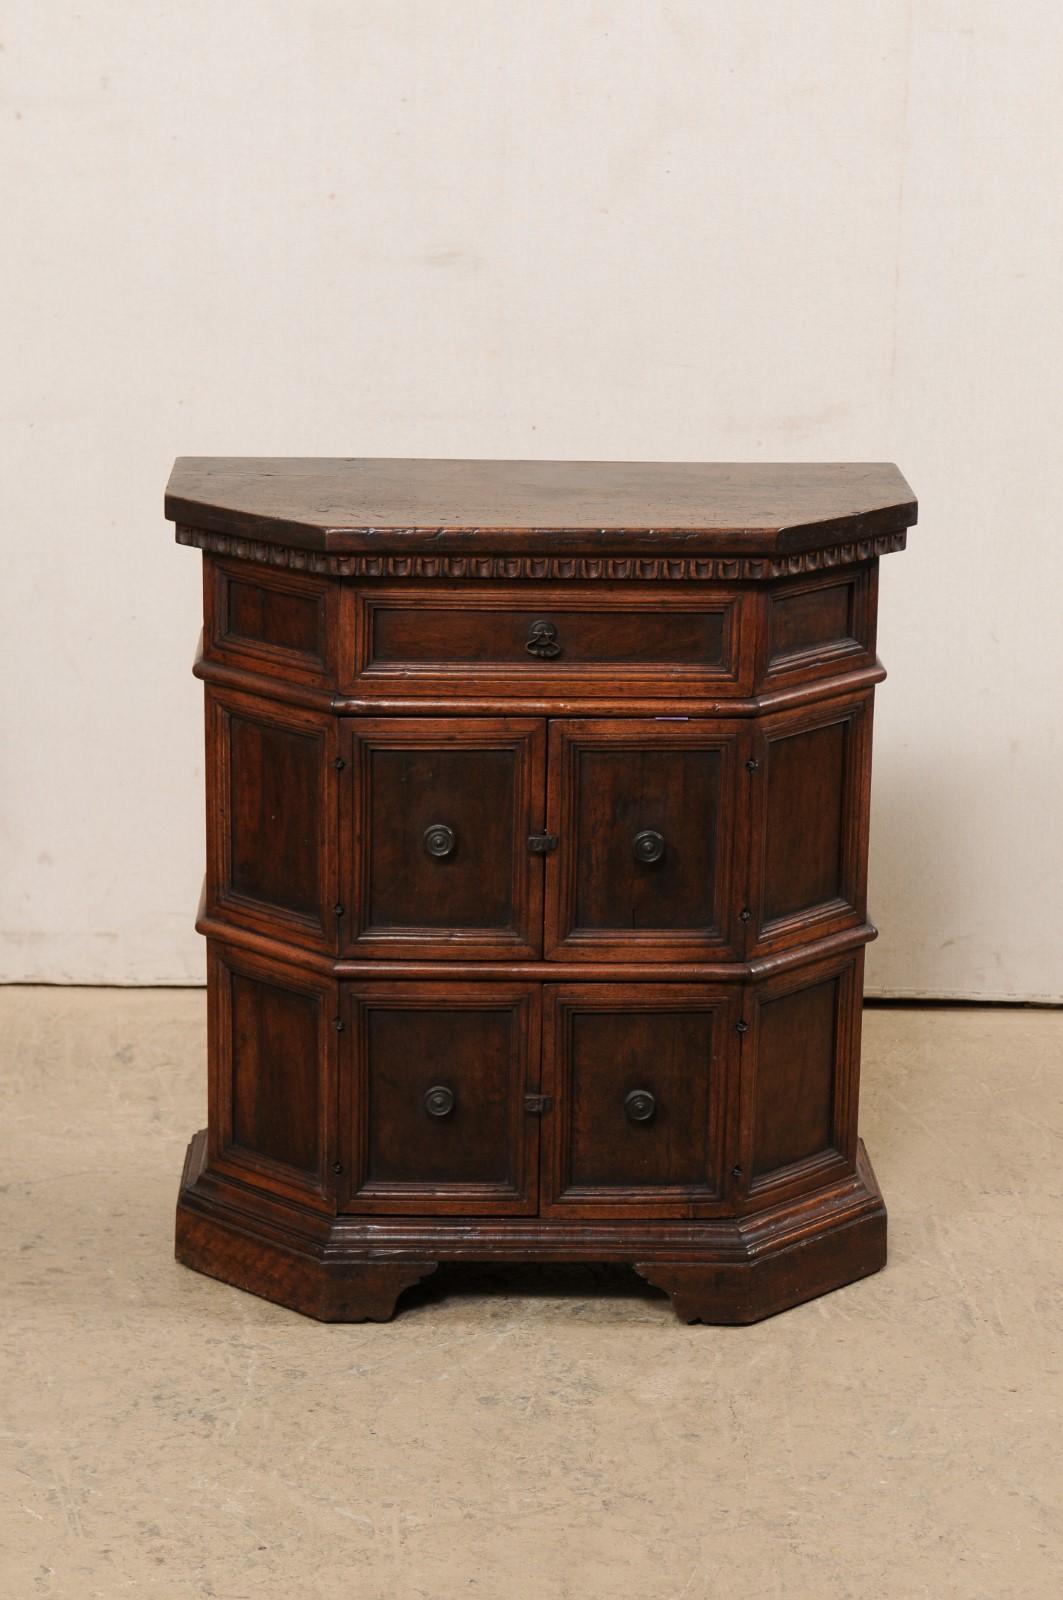 Wood Italian Petite-Sized Paneled & Carved Console Cabinets, Early 19th Century